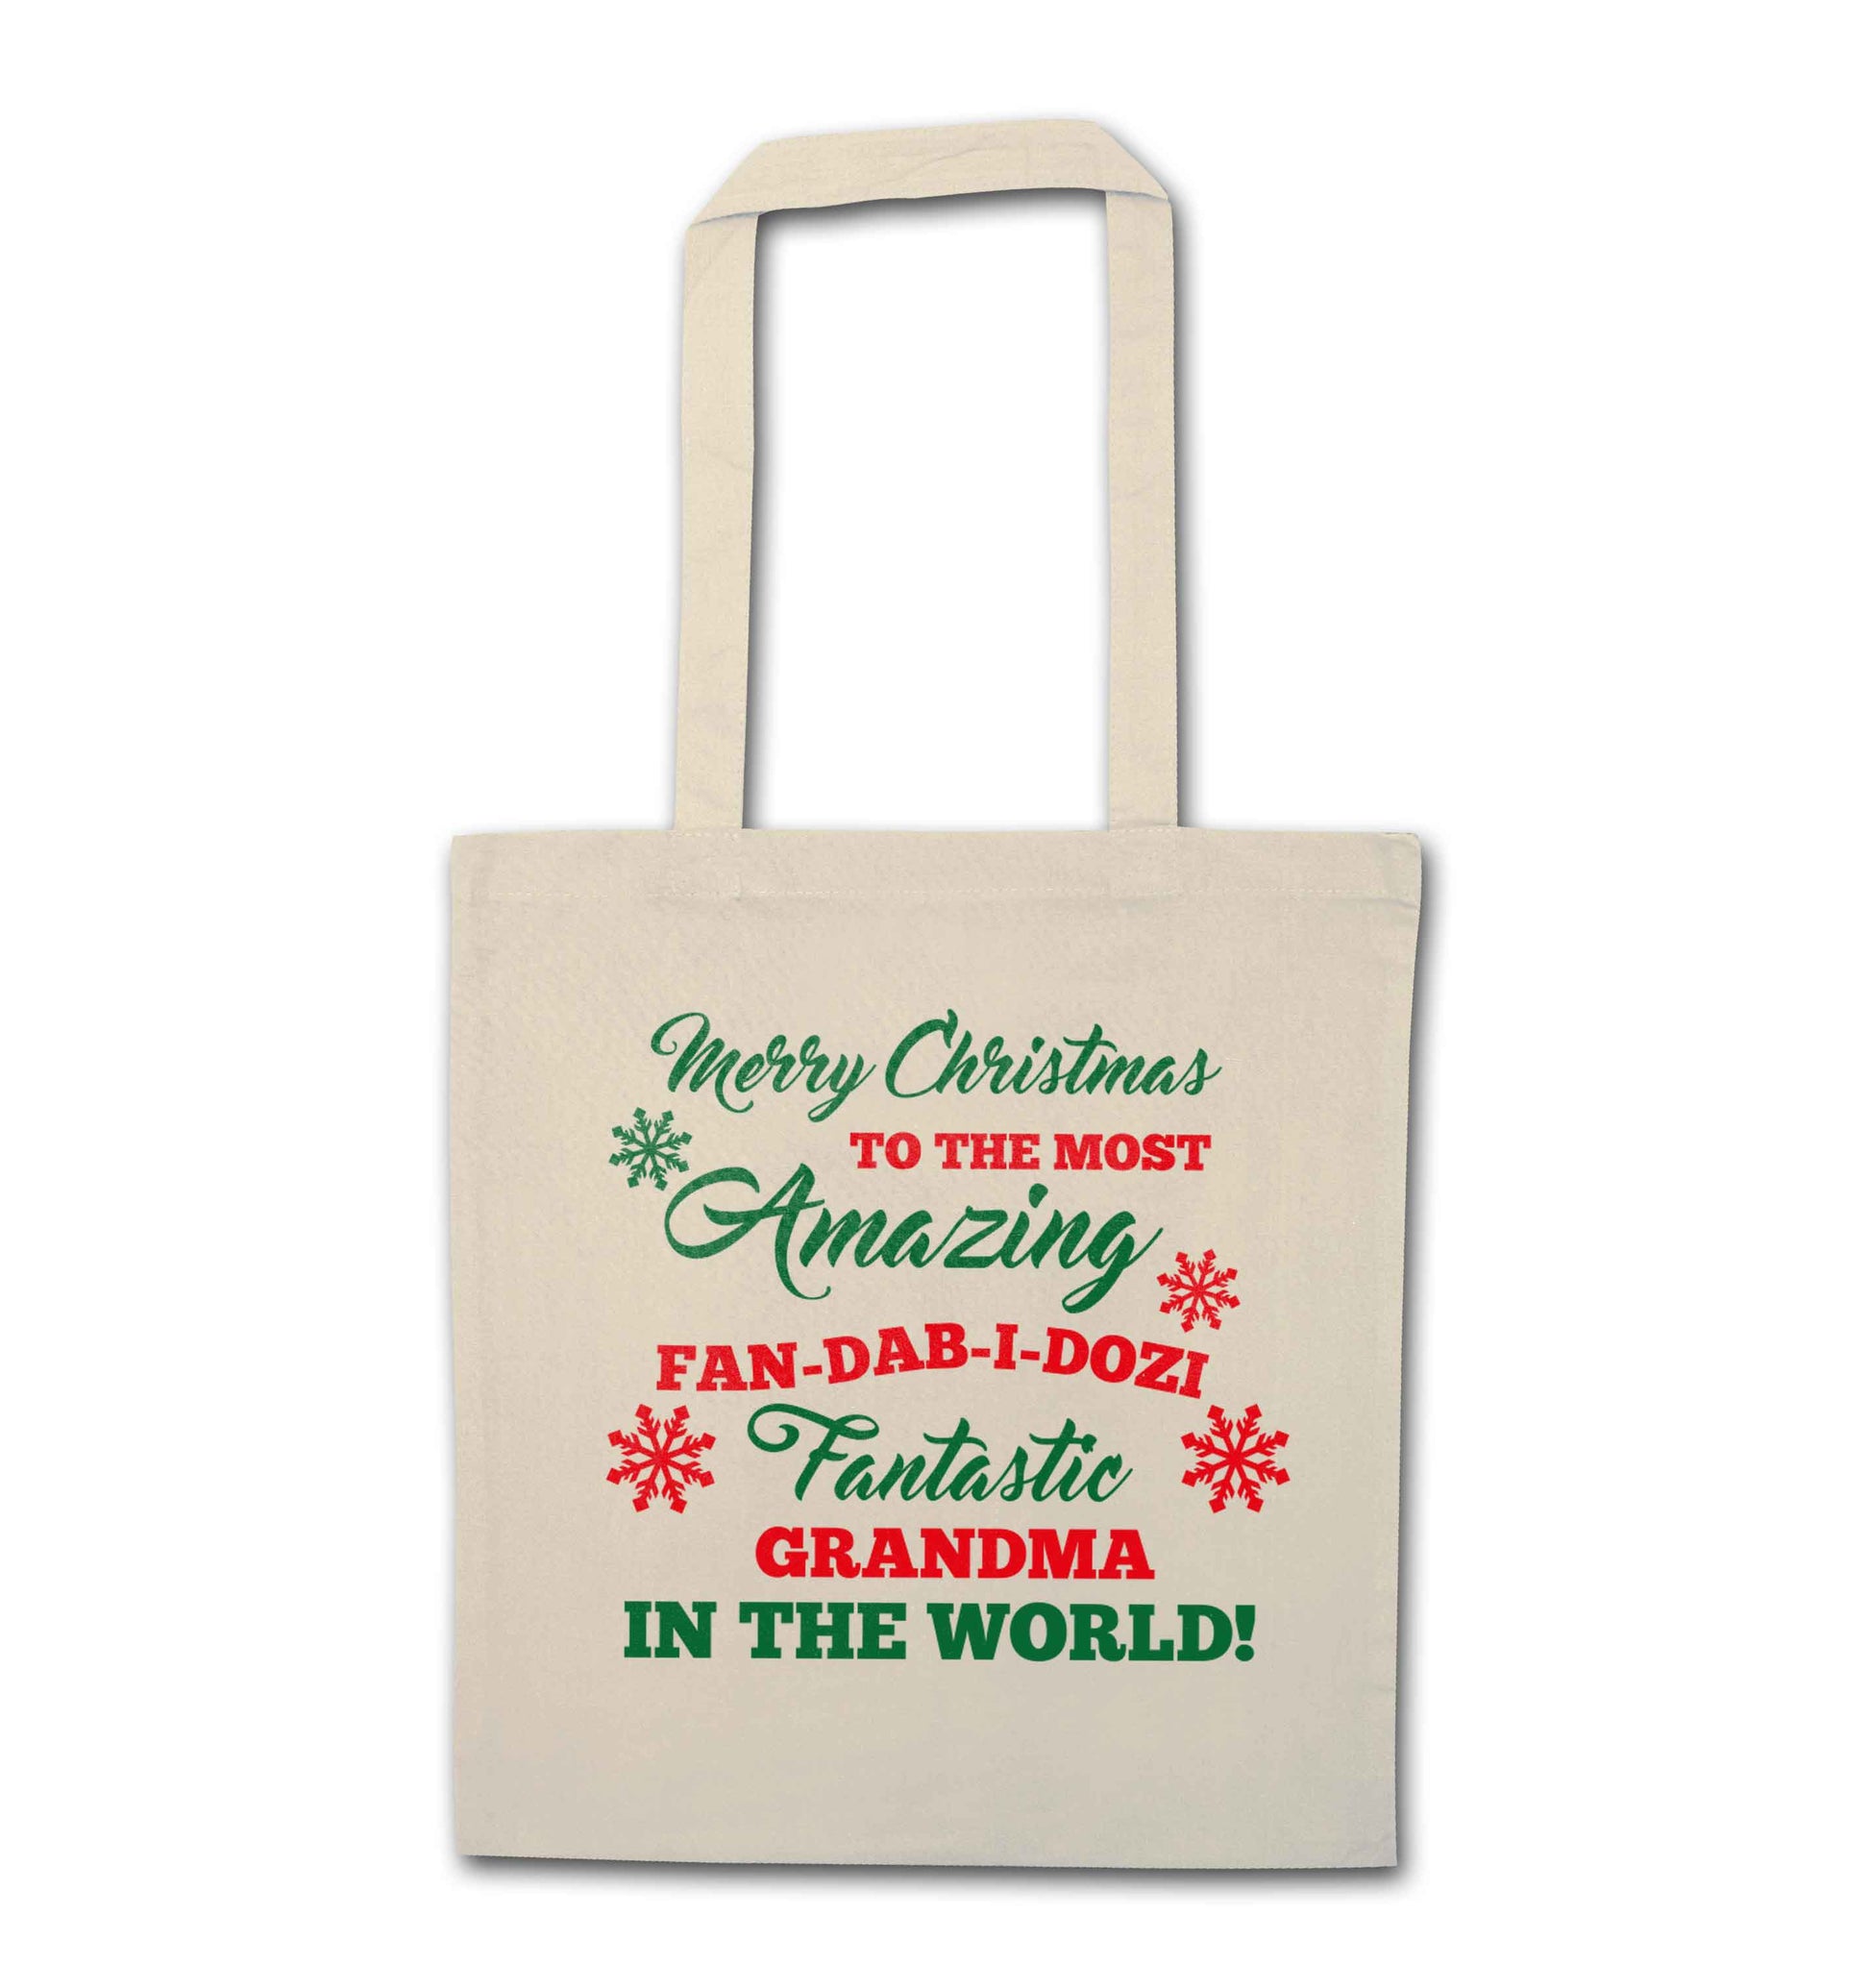 Merry Christmas to the most amazing fan-dab-i-dozi fantasic Grandma in the world natural tote bag